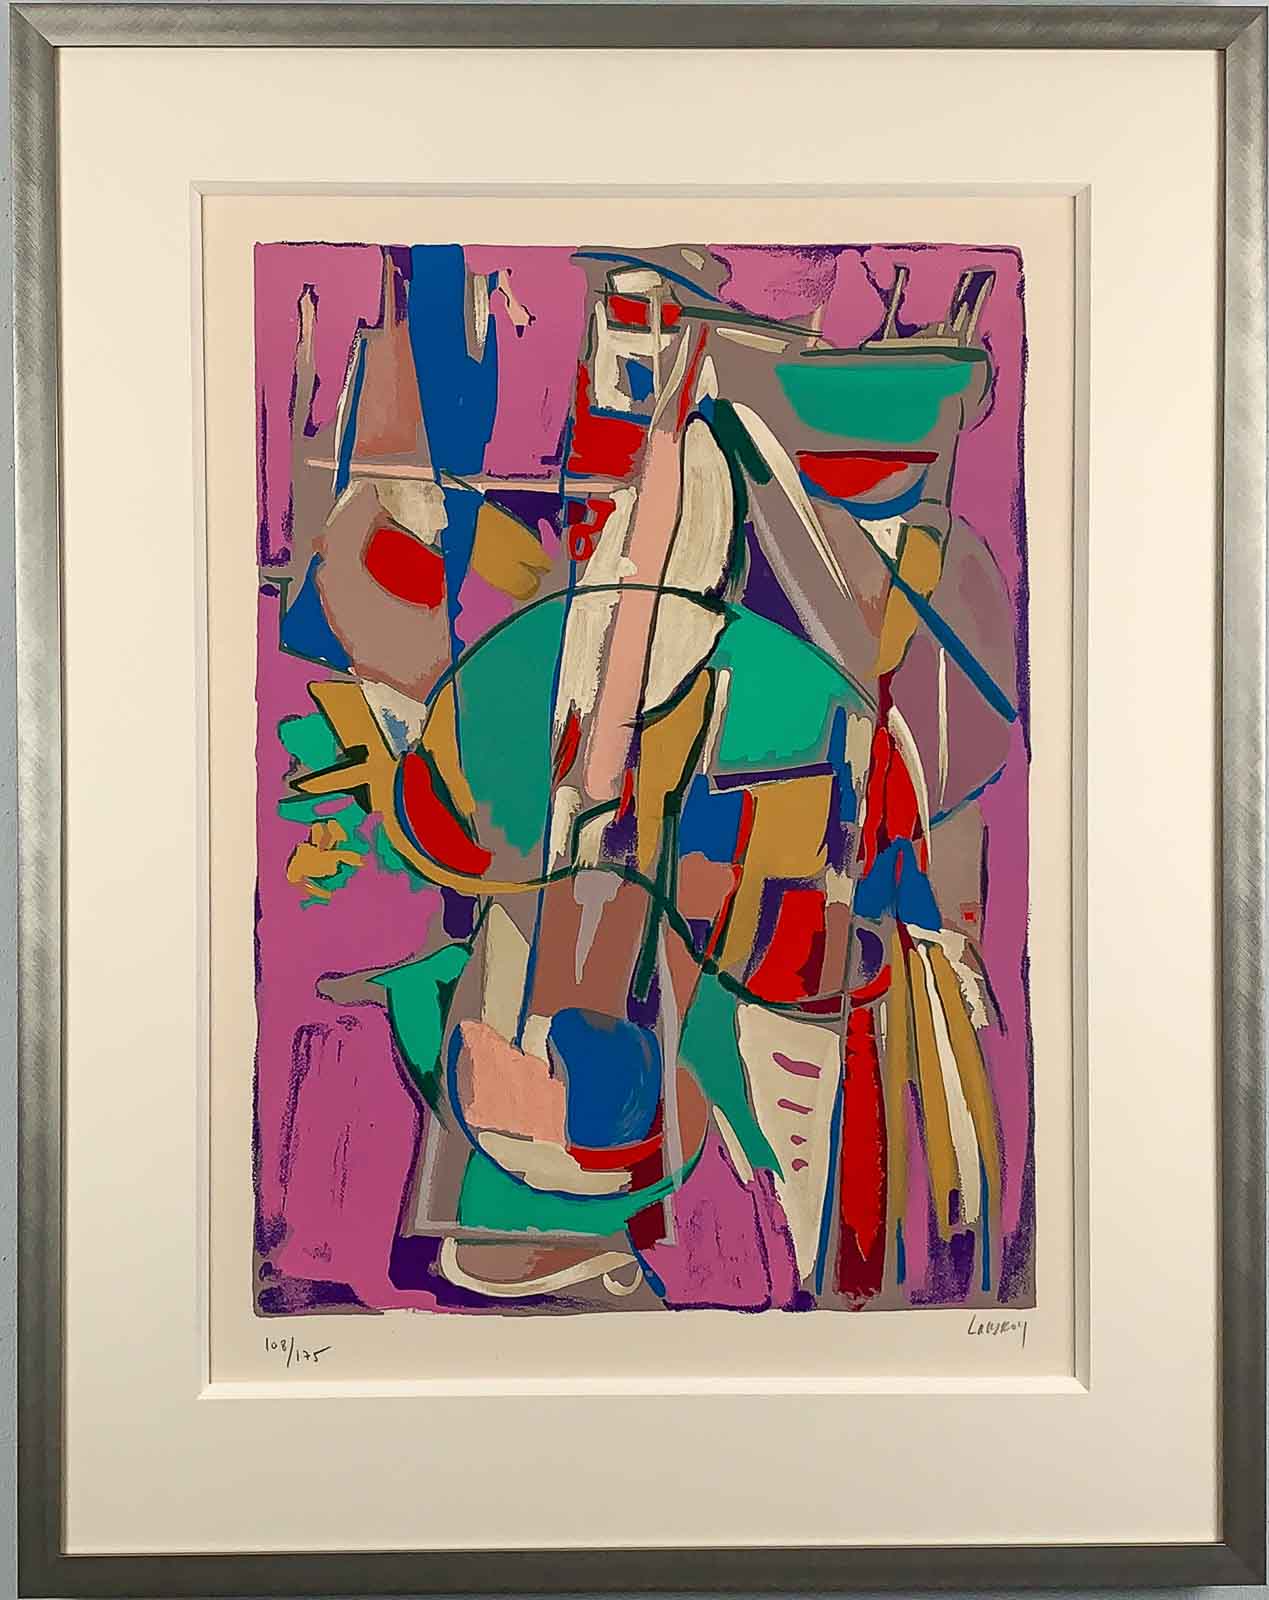 André Lanskoy – Abstract composition, lithograph on Arches paper ca. 1965 – framed, museumglass